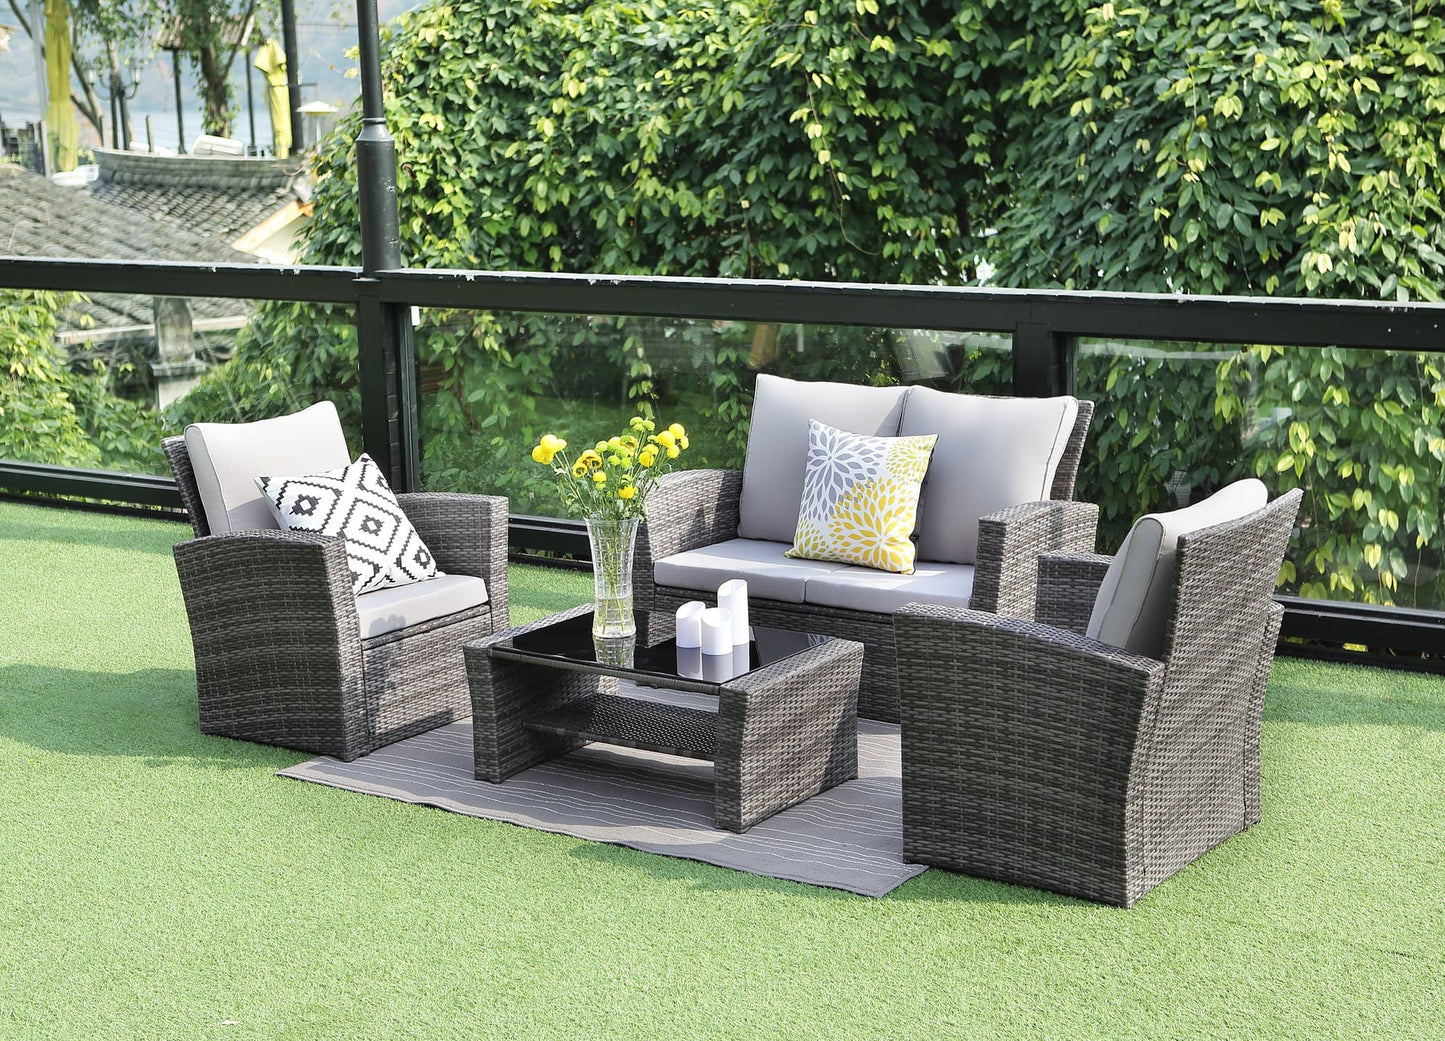 Context Vista 4 Piece All Weather Wicker Sofa Seating Group with Cushions and Coffee Table